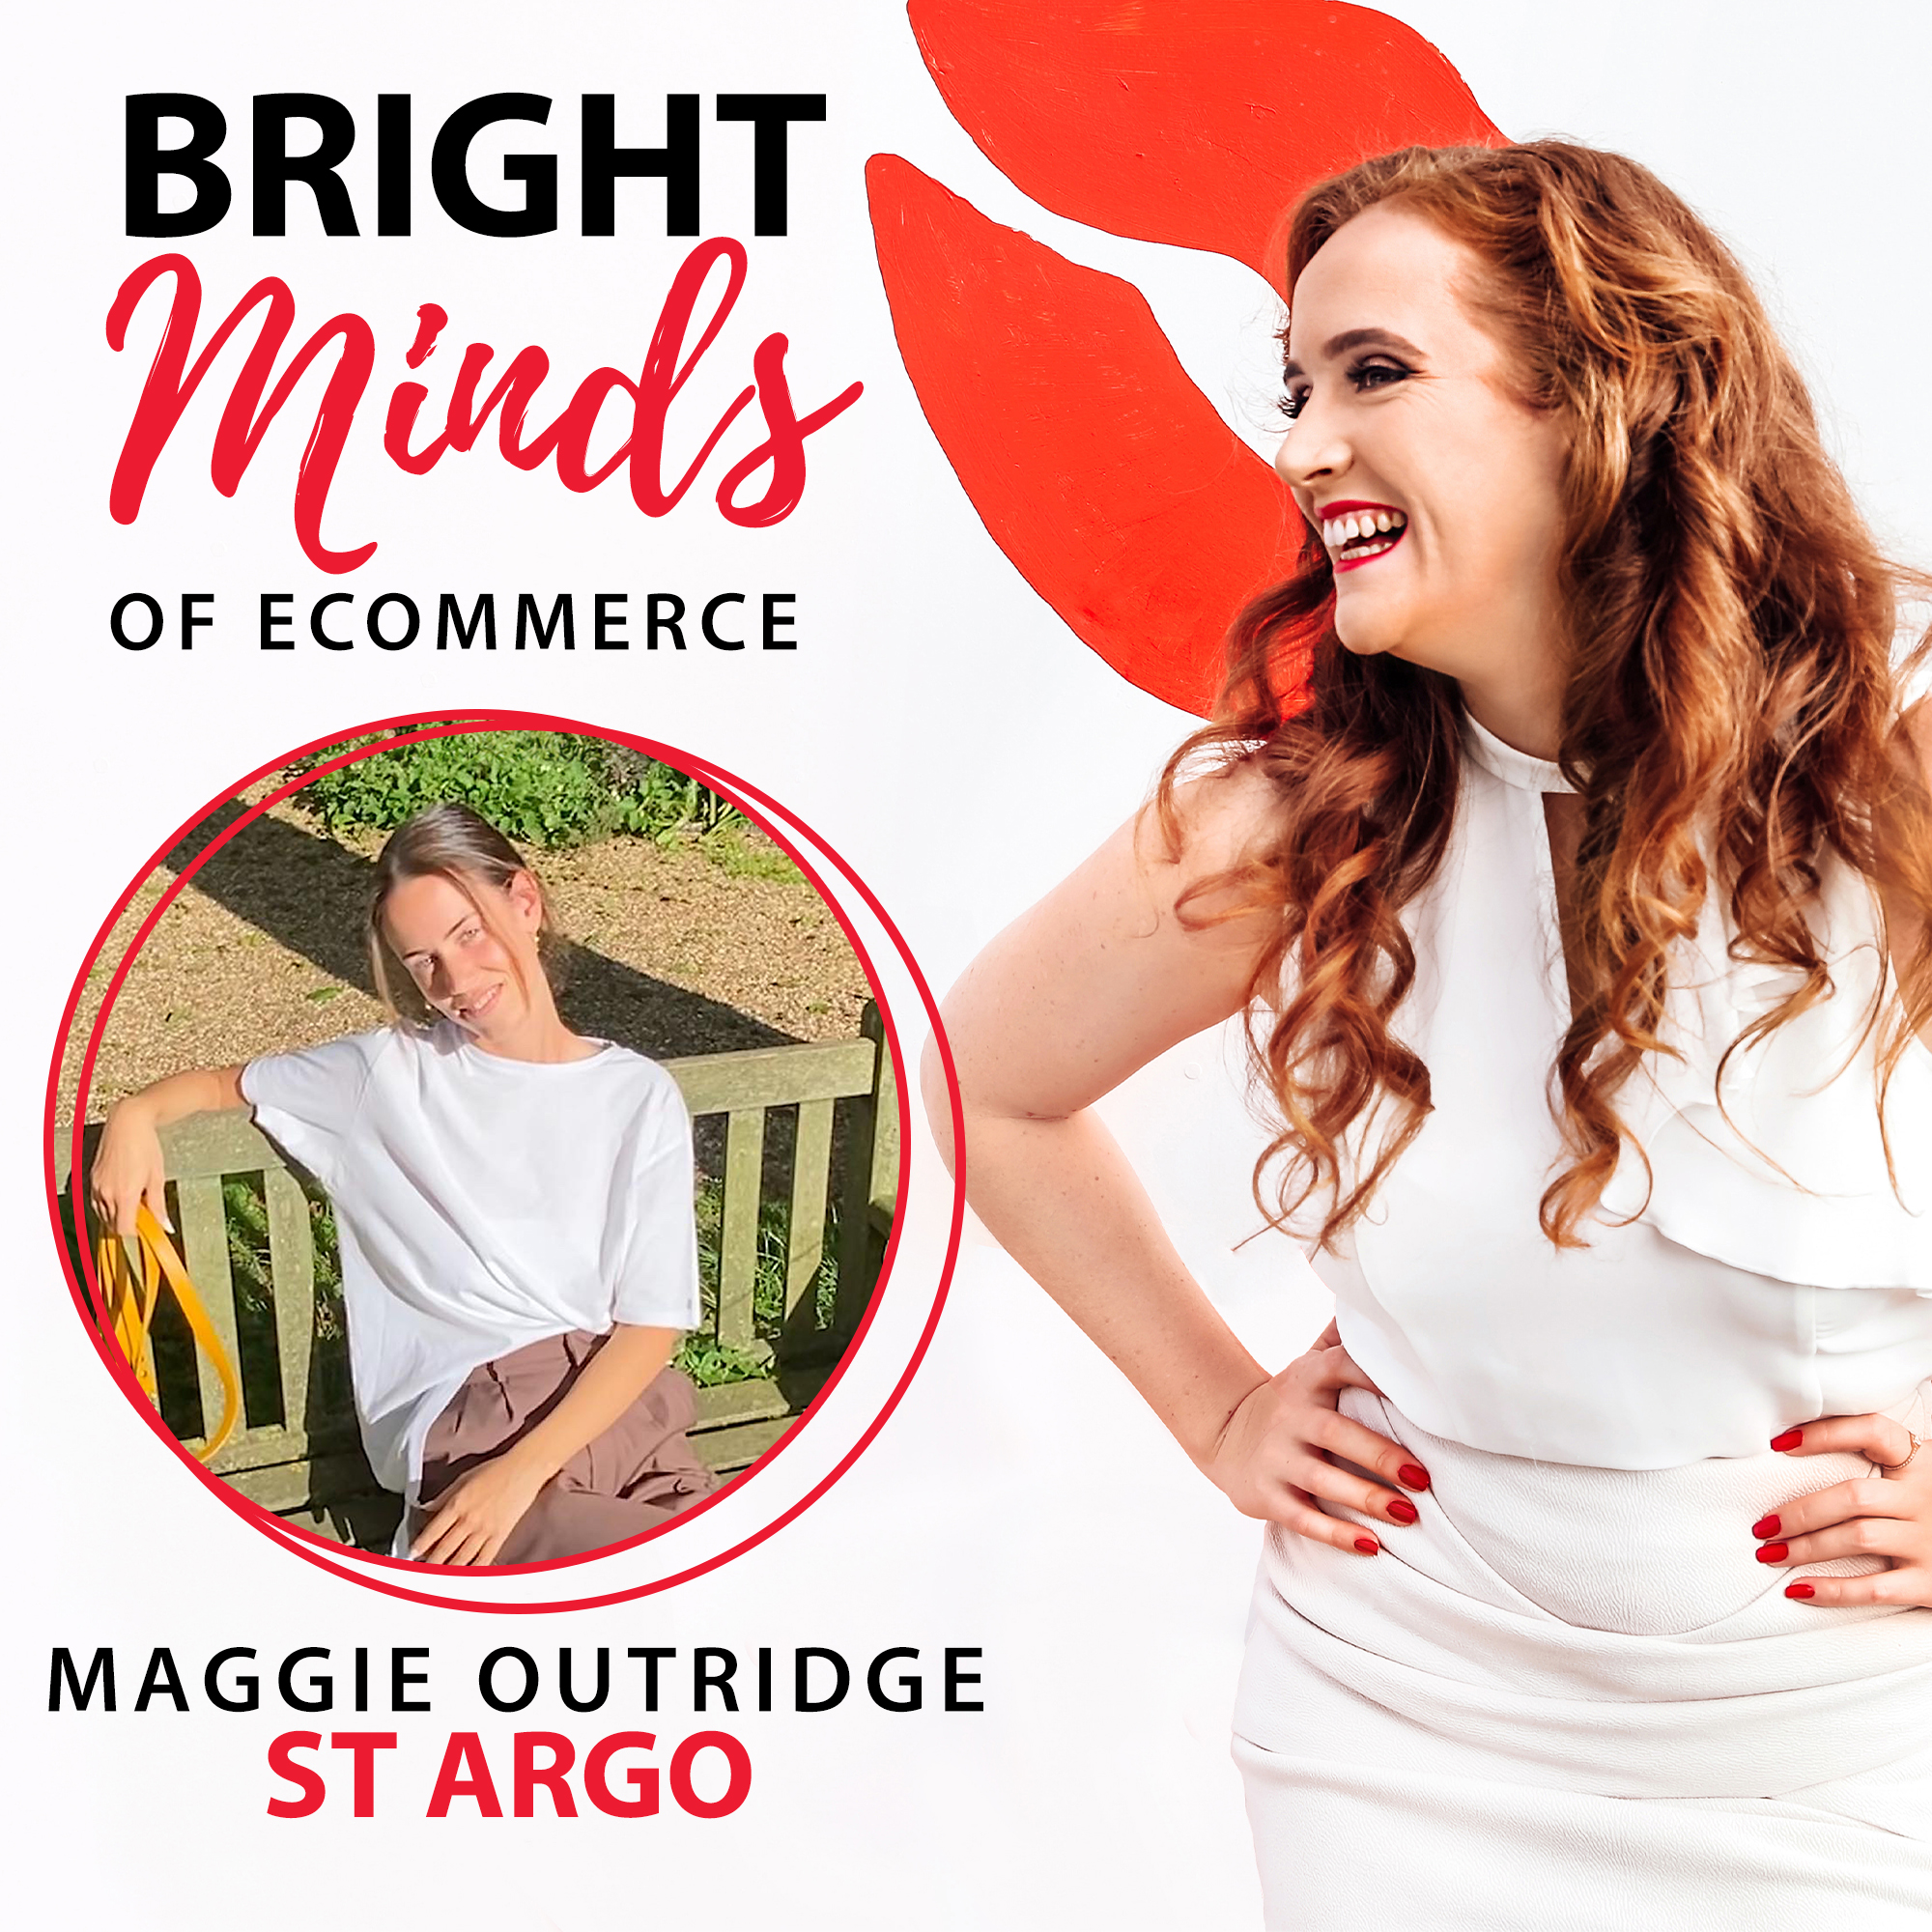 Creative Marketing Ideas and Overcoming Imposter Syndrome with Maggie Outridge from St Argo